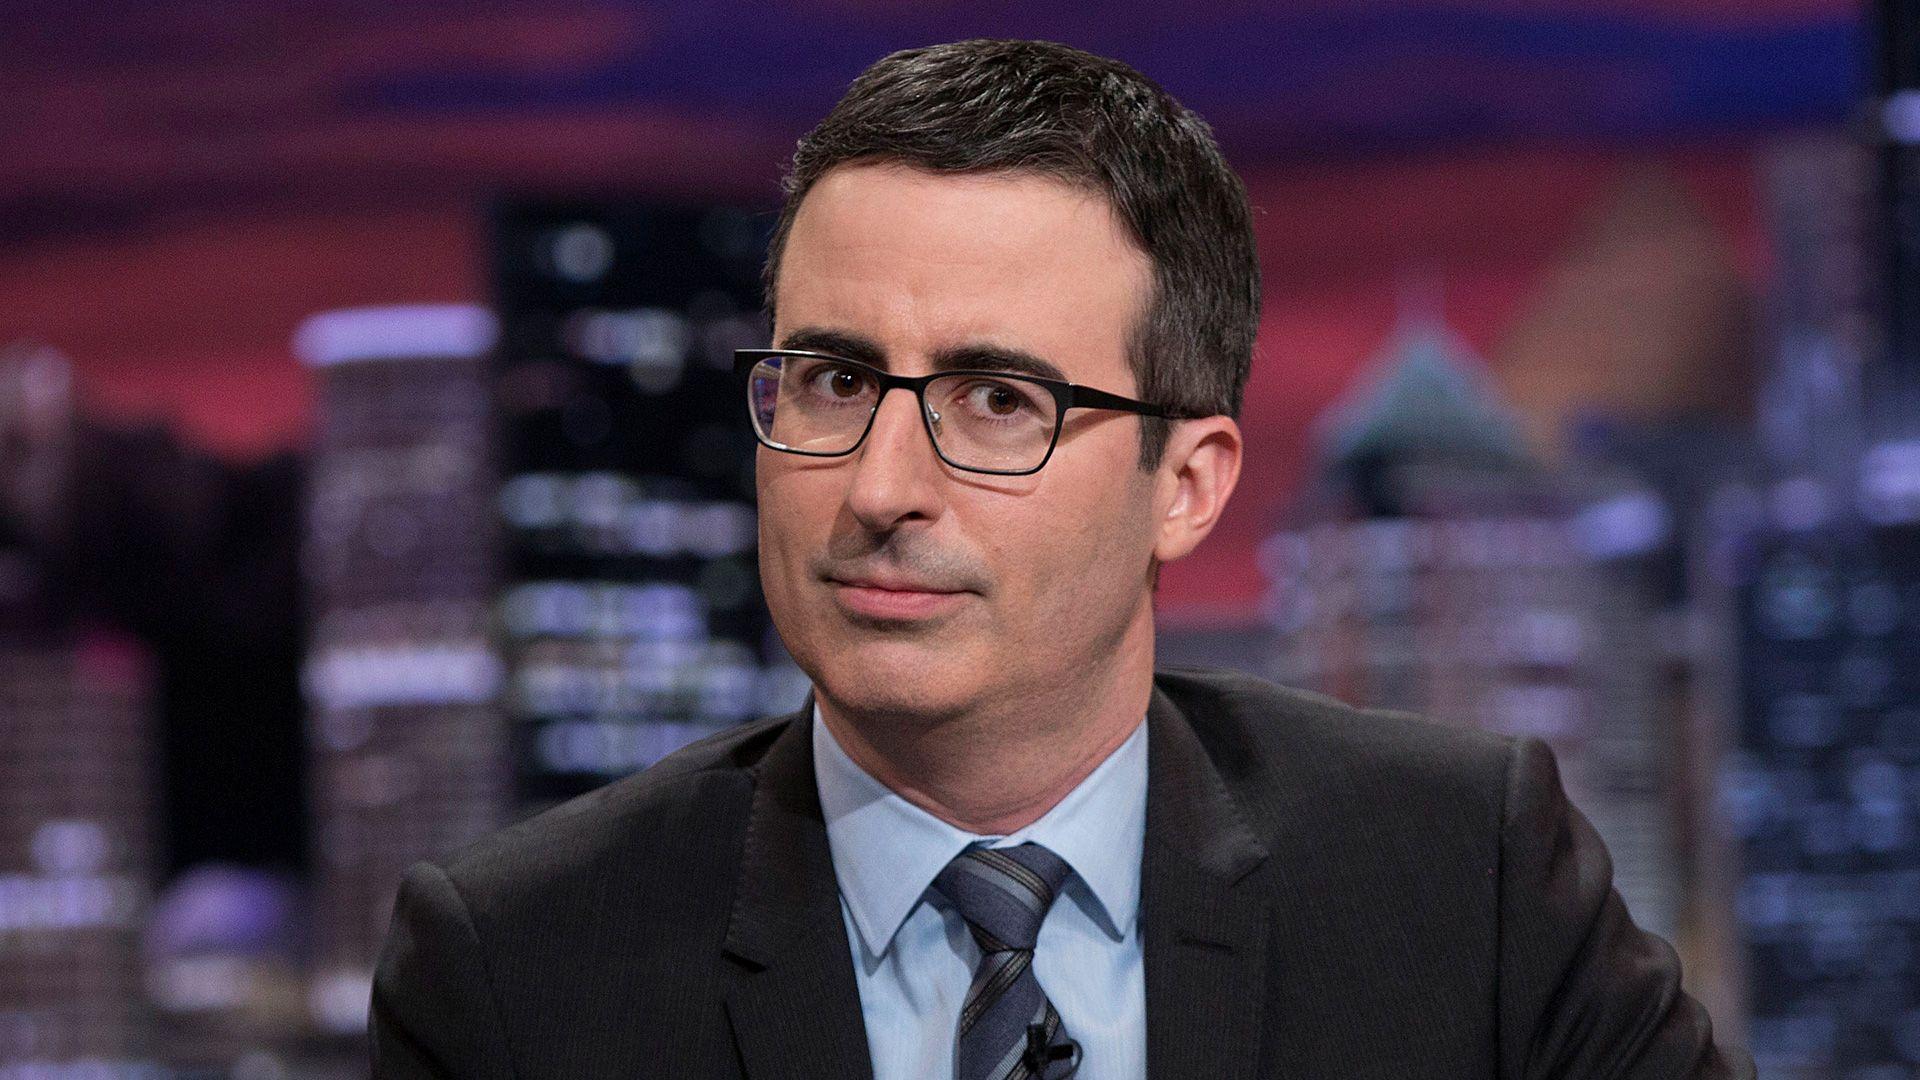 John Oliver hits outdated federal marijuana laws, which turn legal